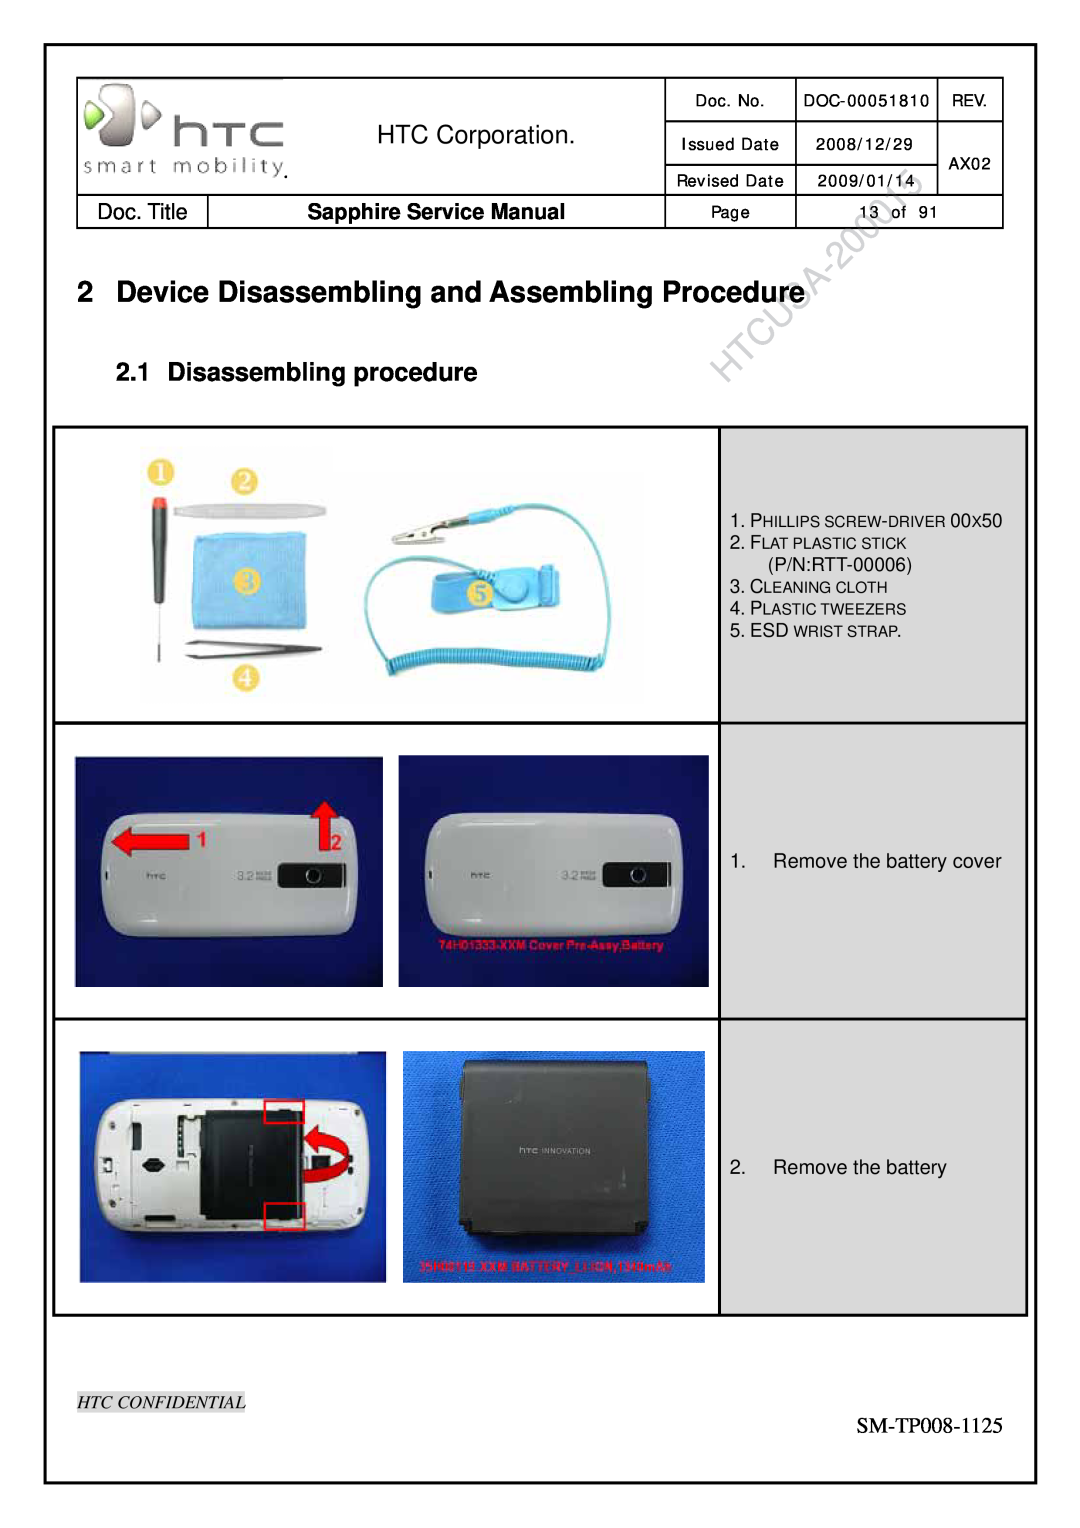 HTC SM-TP008-1125 Device Disassembling and Assembling Procedure, Disassembling procedure, HTC Corporation, Doc. No, 13 of 